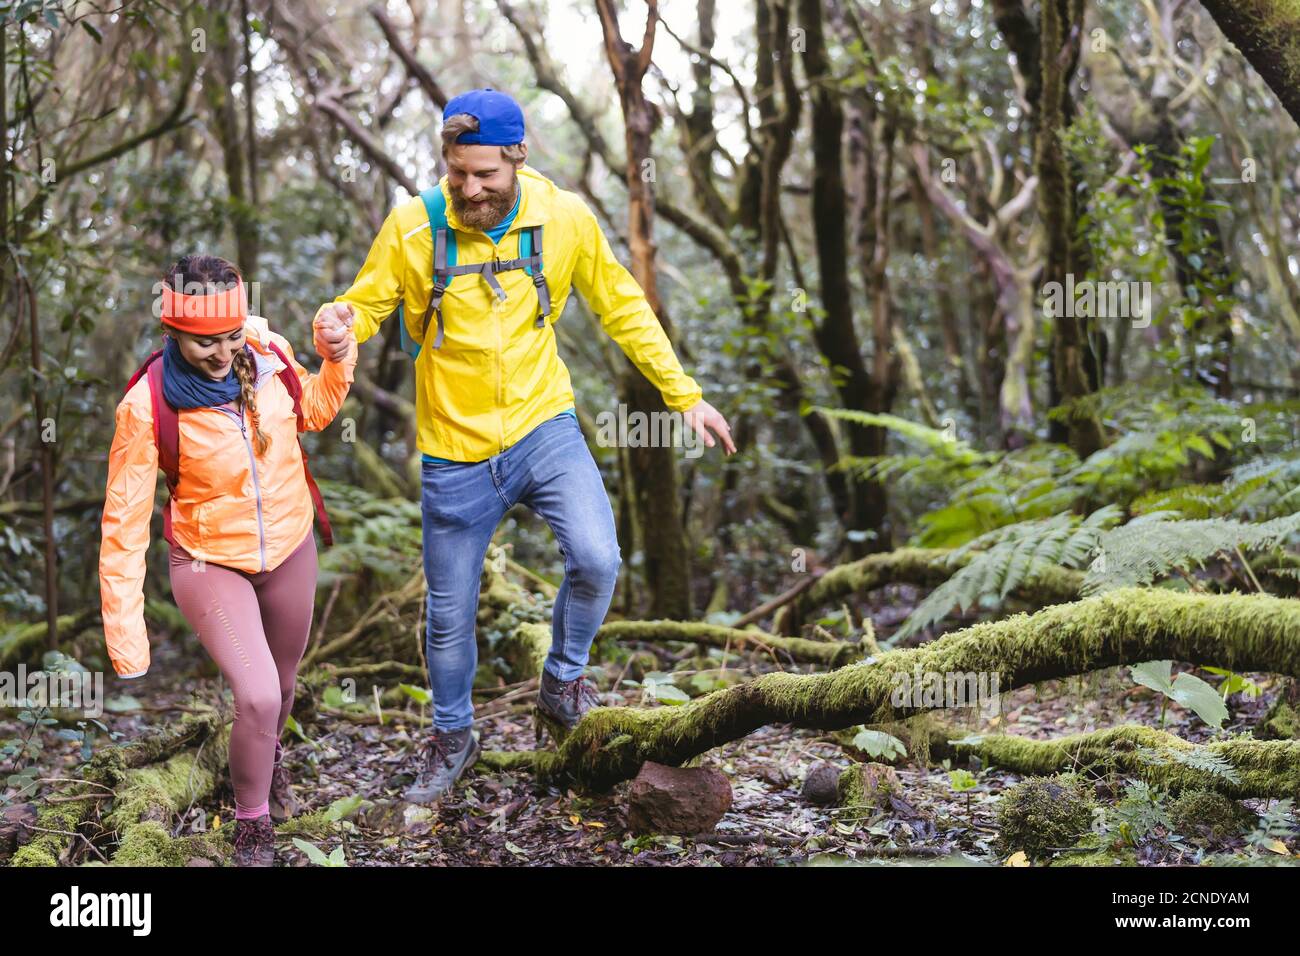 Young couple doing forest excursion - Happy people having fun discovering nature woods Stock Photo